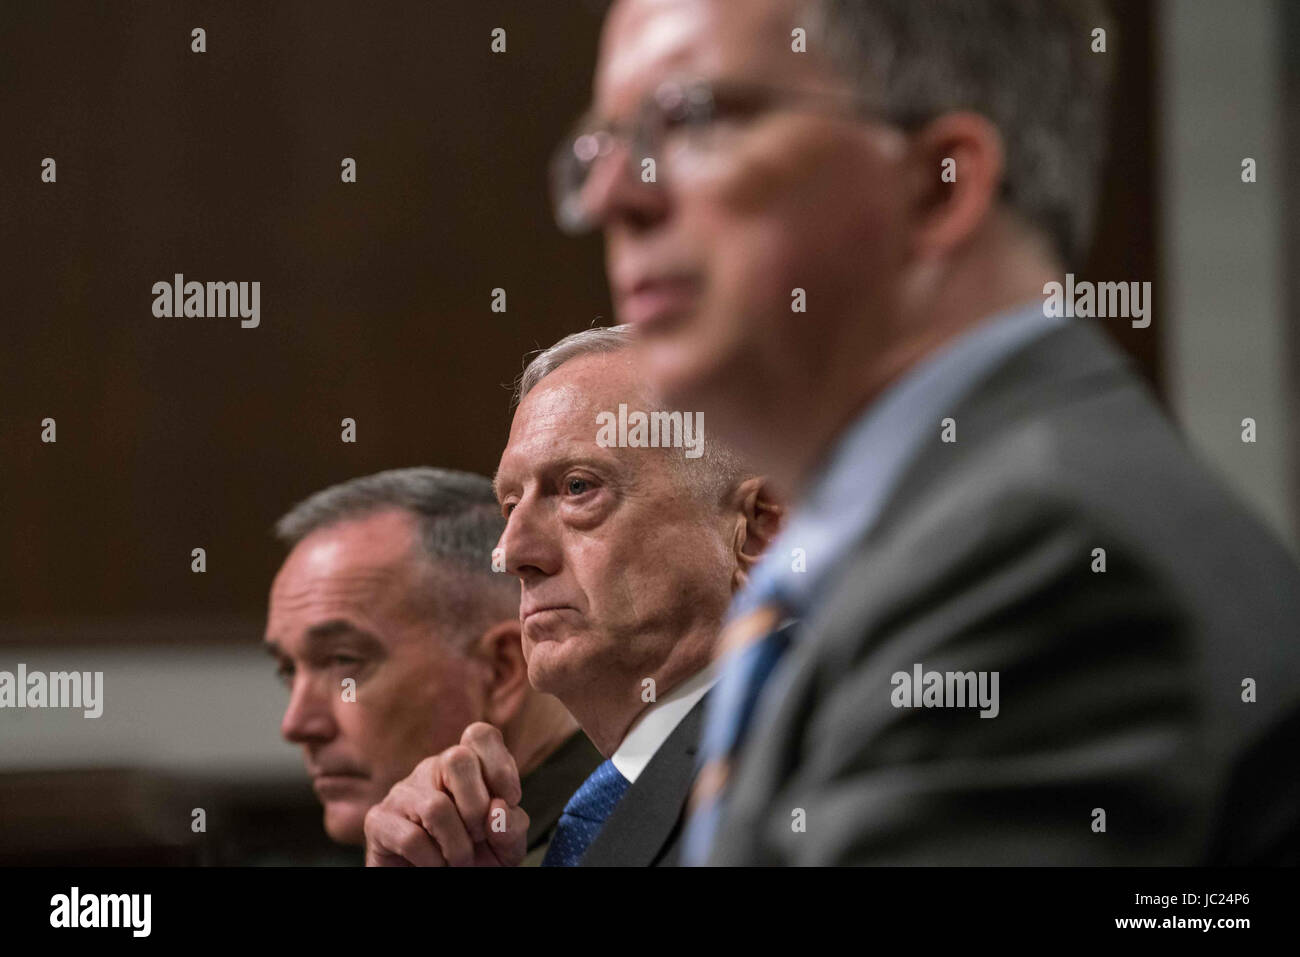 Washington DC, USA. 13th June, 2017. US Secretary of Defense James Mattis (C), Chairman of the Joint Chiefs of Staff General Joseph Dunford, Jr., (L), and Under Secretary of Defense (Comptroller) and Chief Financial Officer David Norquist (R), testify during a US House Armed Services Committee hearing on the Fiscal Year 2018 budget on Capitol Hill in Washington. Credit: Ken Cedeno/ZUMA Wire/Alamy Live News Stock Photo